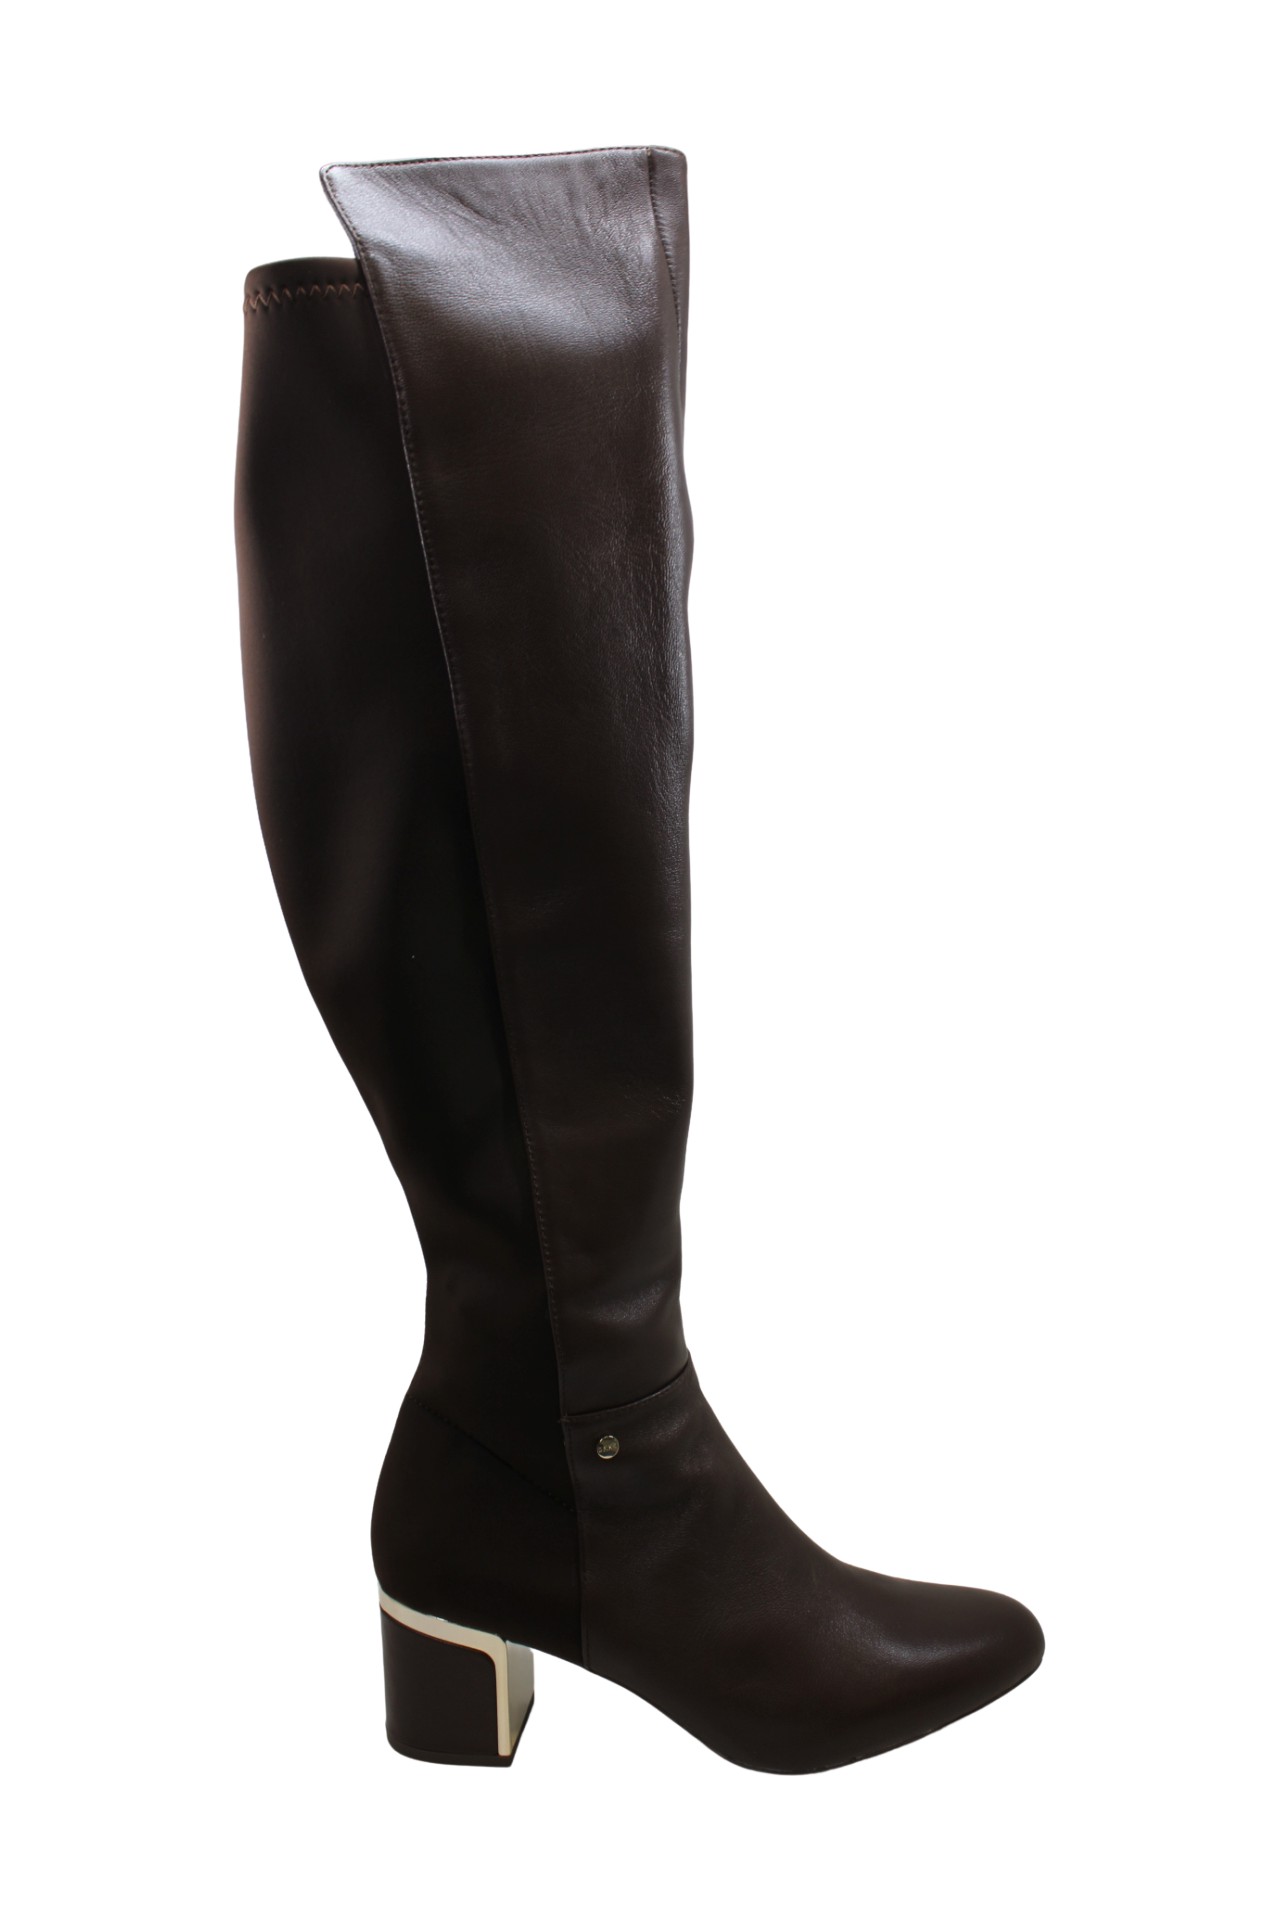 DKNY Womens Cora Suede Closed Toe Knee High Fashion Boots, Brown, Size